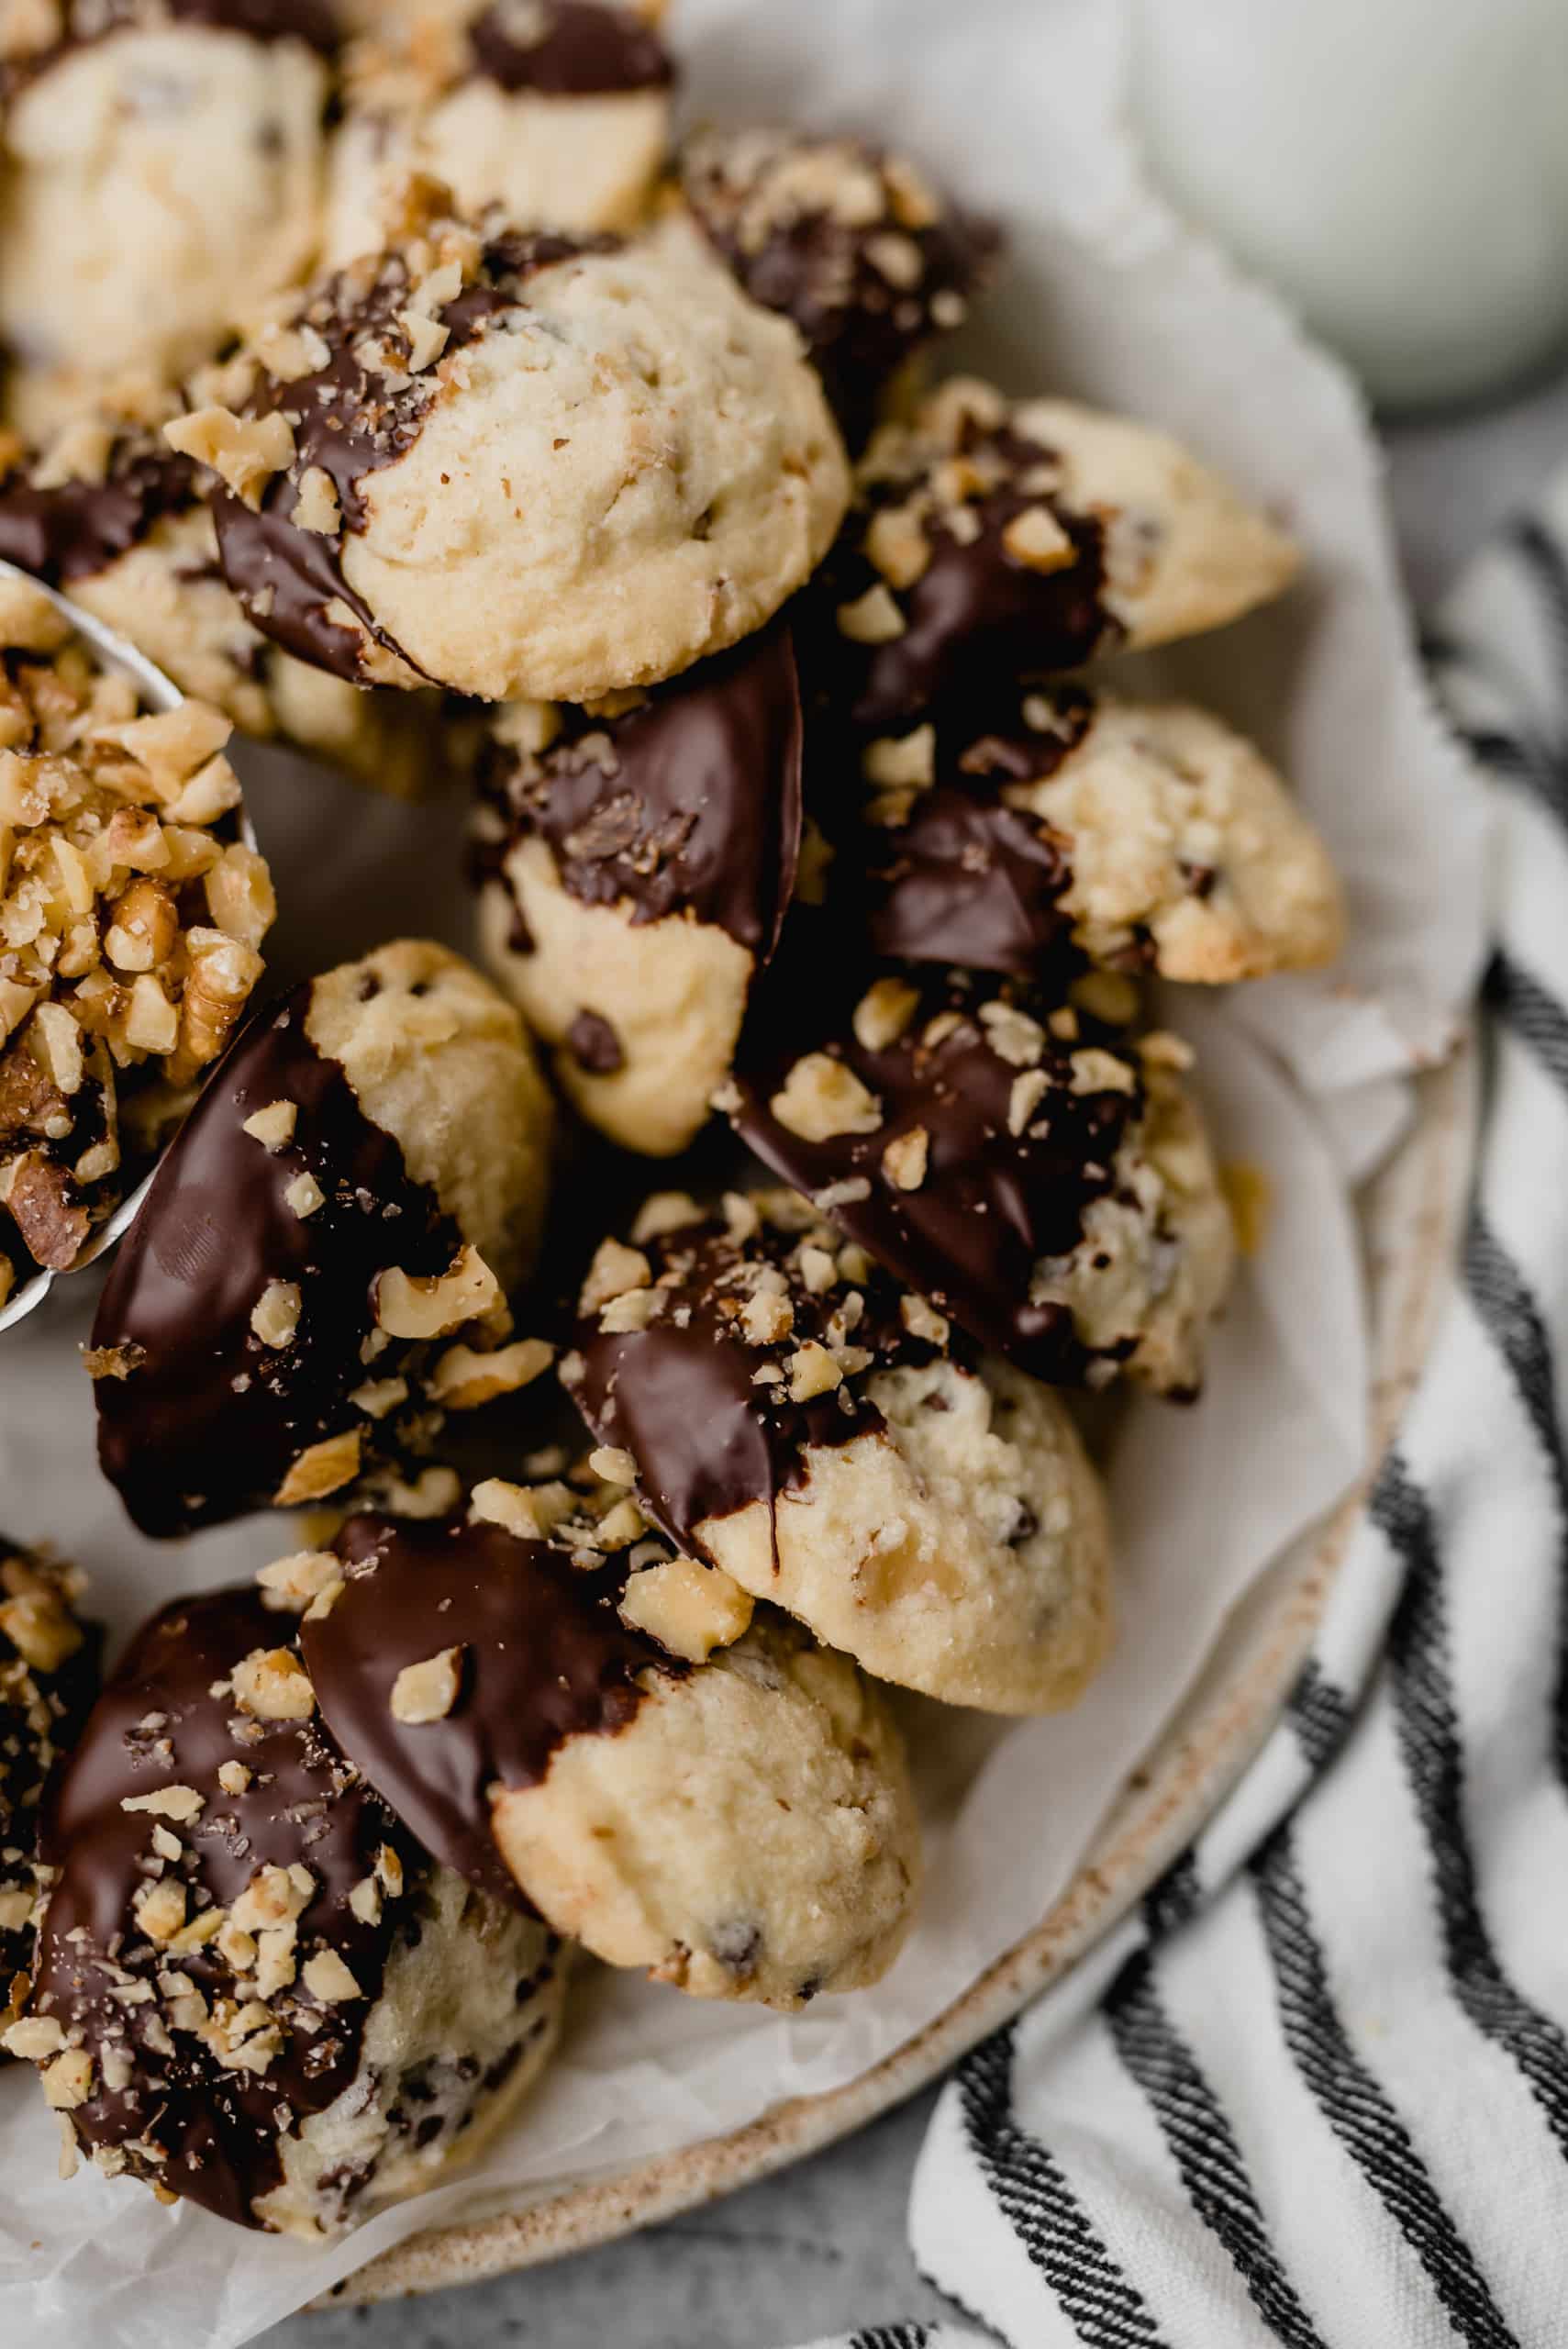 Plate of Walnut Butter Cookies dipped in chocolate and nuts.